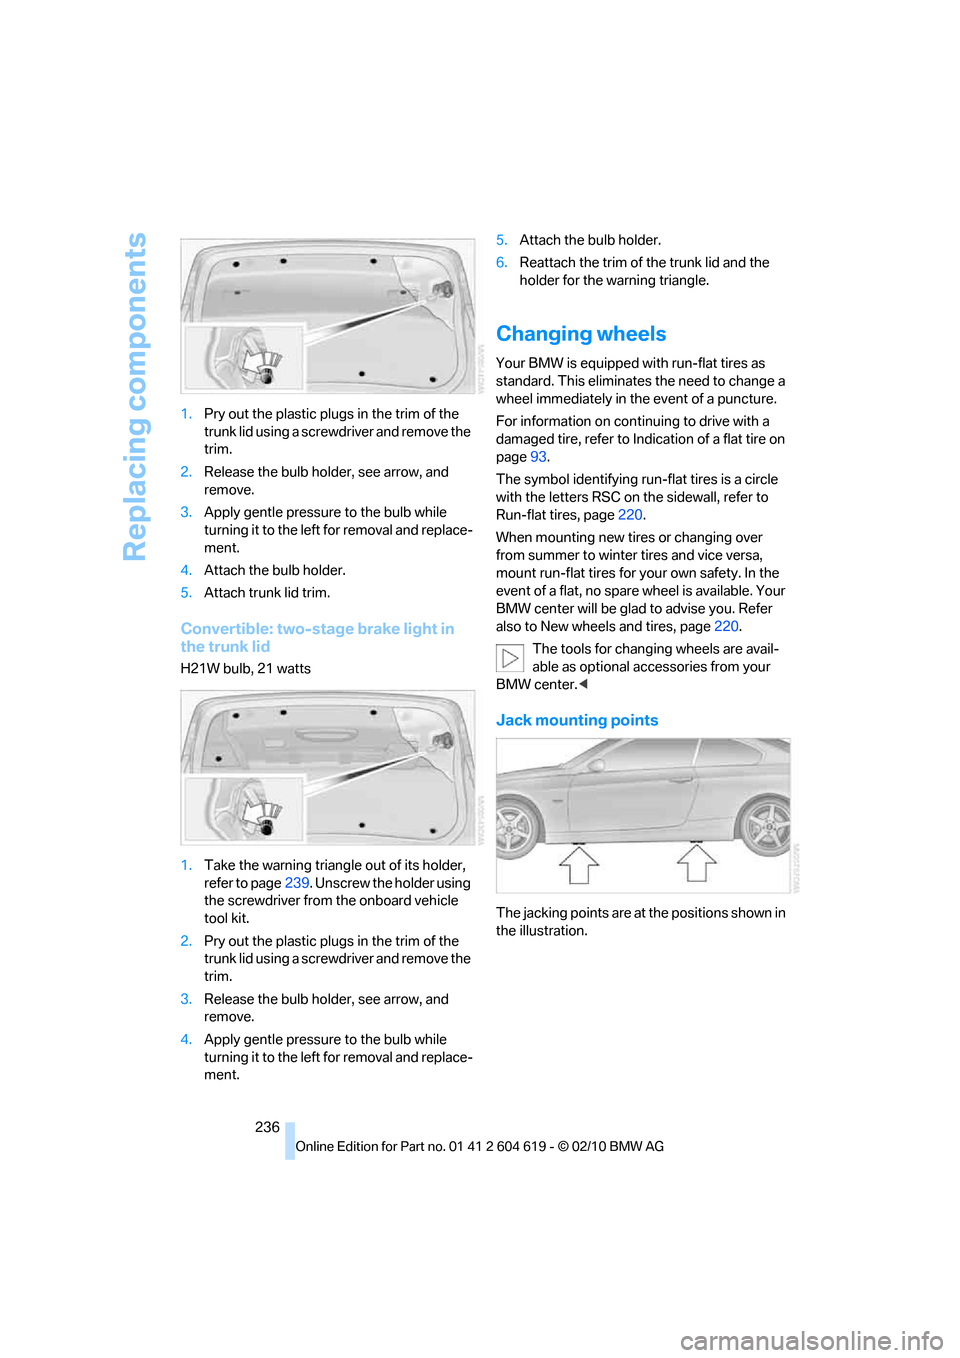 BMW 328I CONVERTIBLE 2011 E94 Owners Manual Replacing components
236 1.Pry out the plastic plugs in the trim of the 
trunk lid using a screwdriver and remove the 
trim.
2.Release the bulb holder, see arrow, and 
remove.
3.Apply gentle pressure 